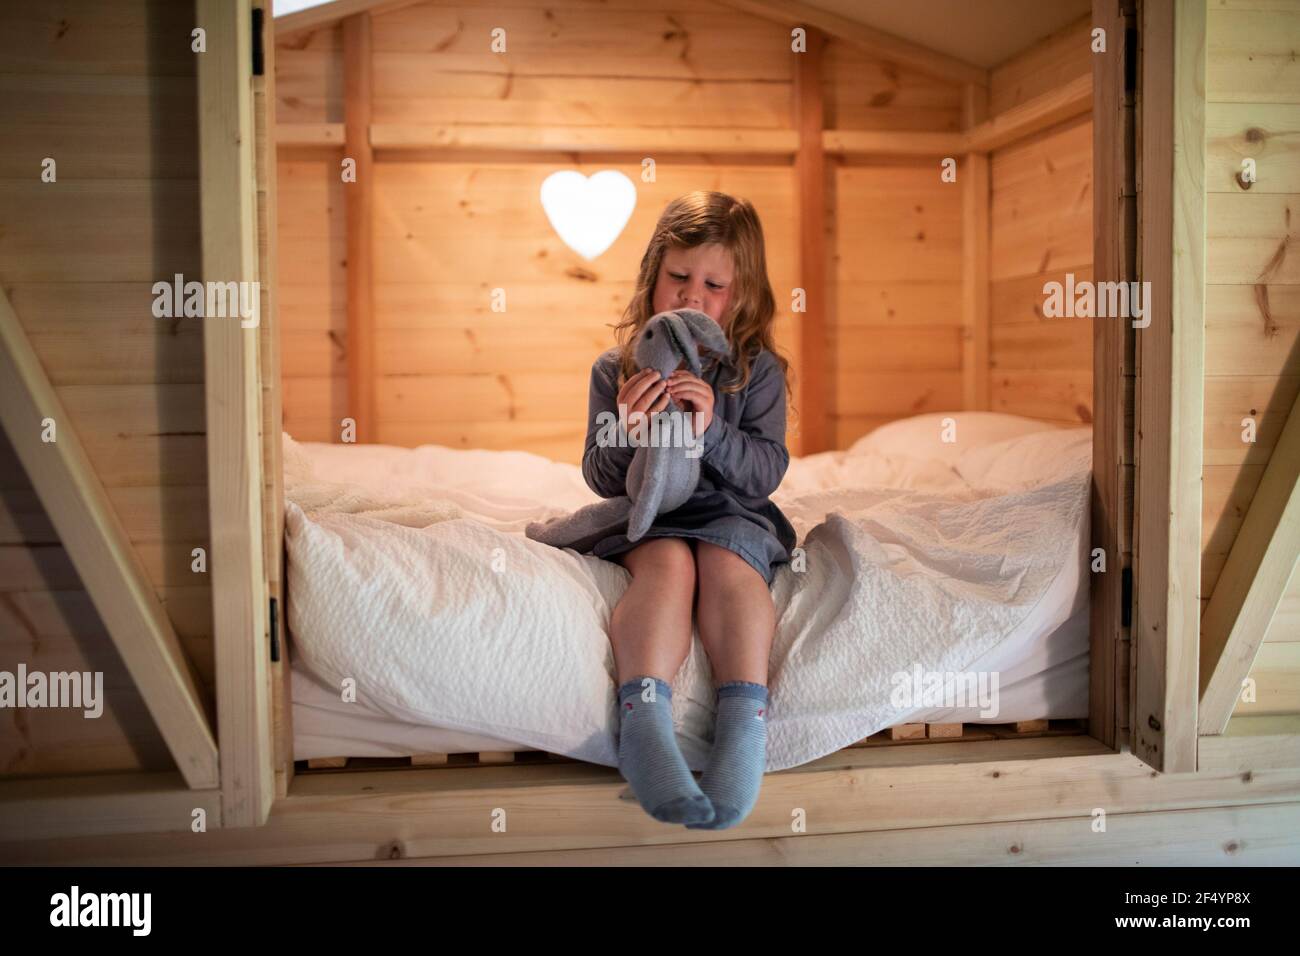 Cute girl playing with stuffed bunny on bed in wood loft Stock Photo